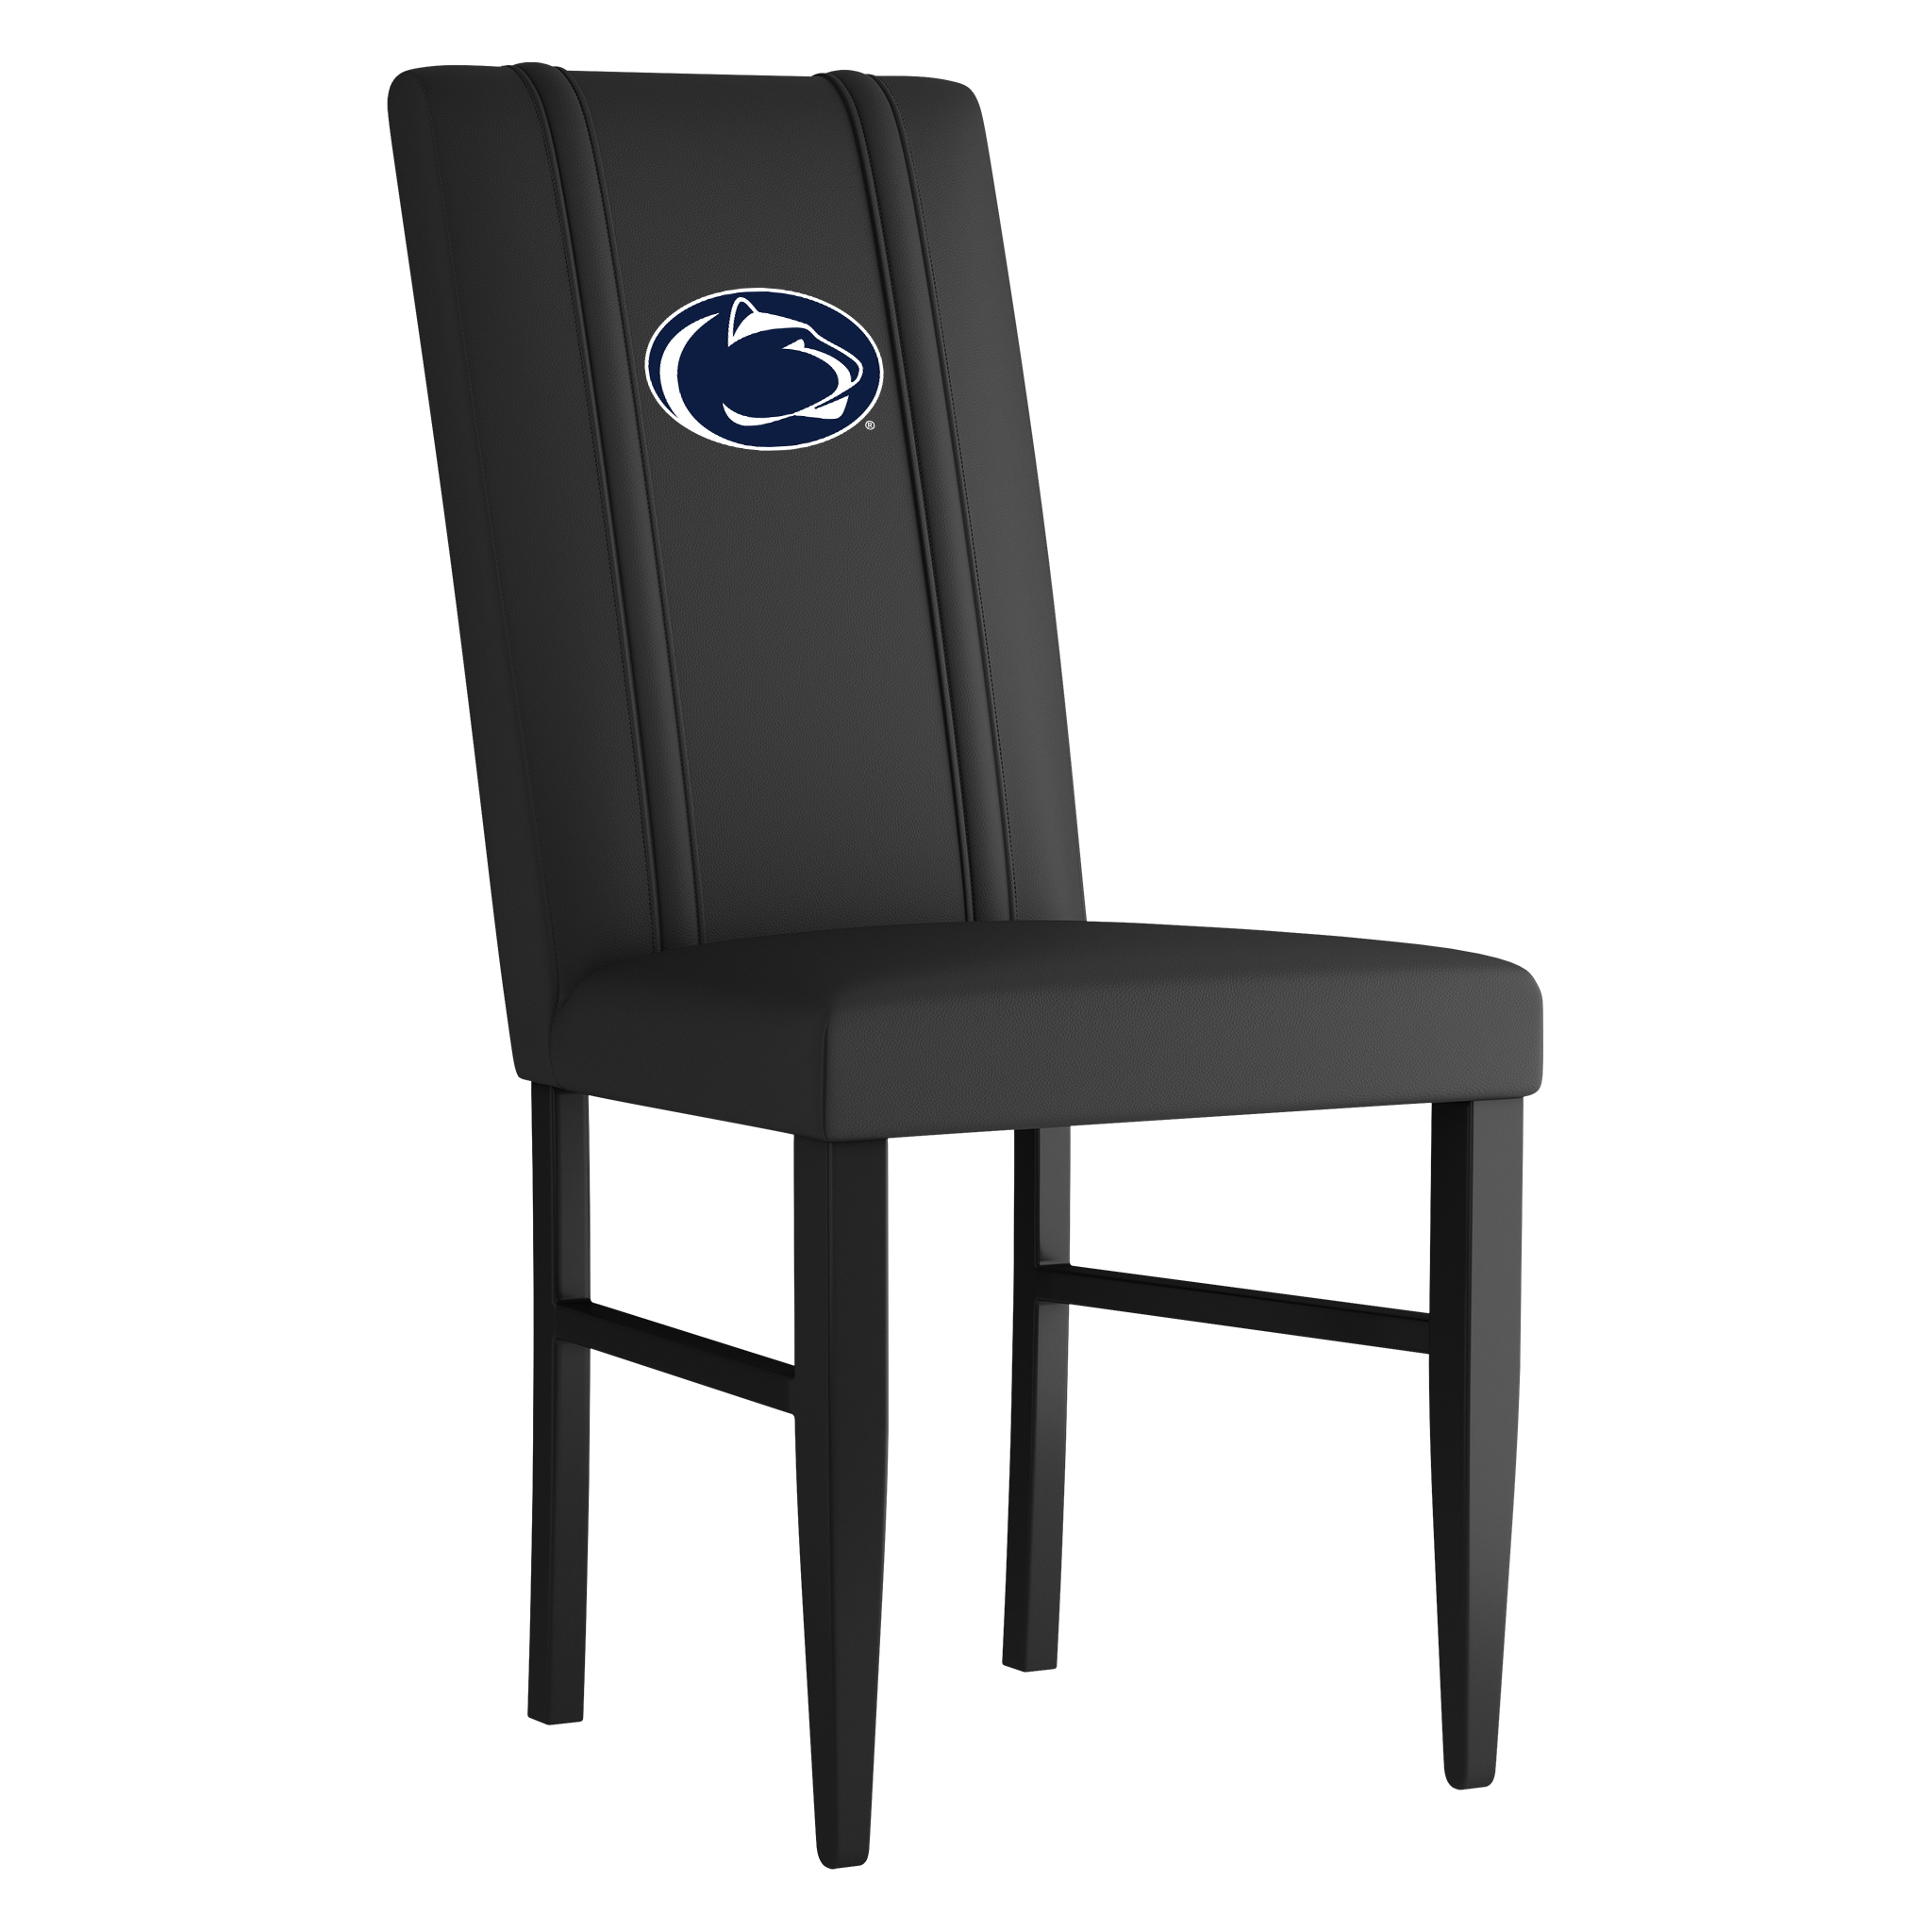 Penn State Nittany Lions Side Chair 2000 With Penn State Nittany Lions Logo